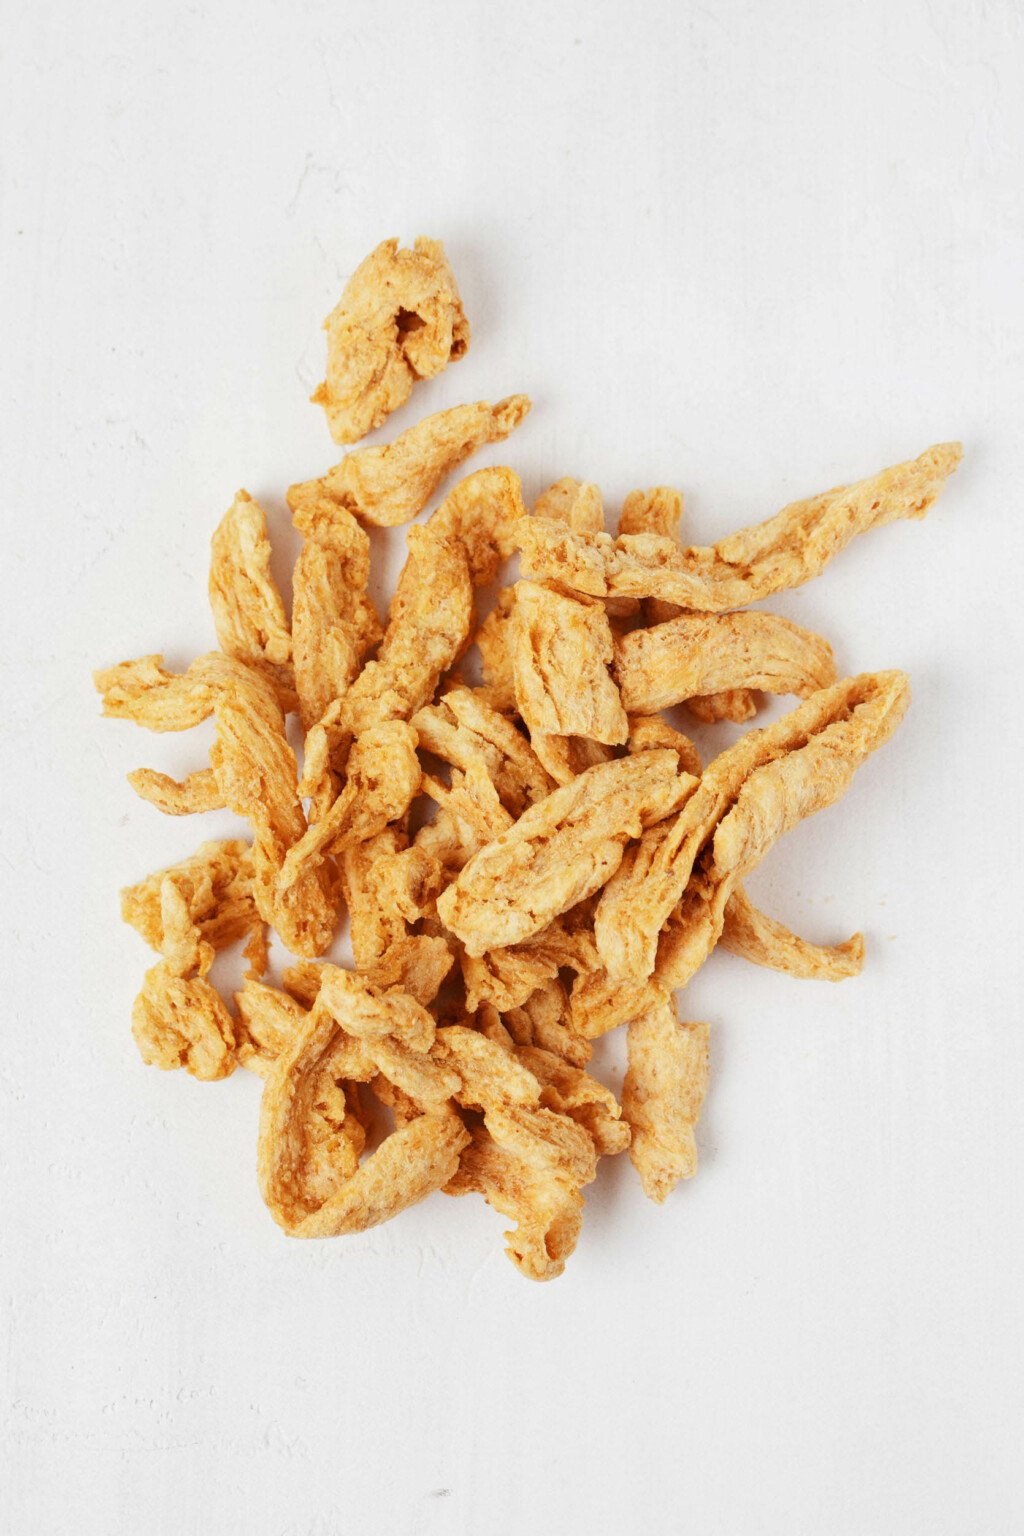 An overhead image of soy curls on a white surface.